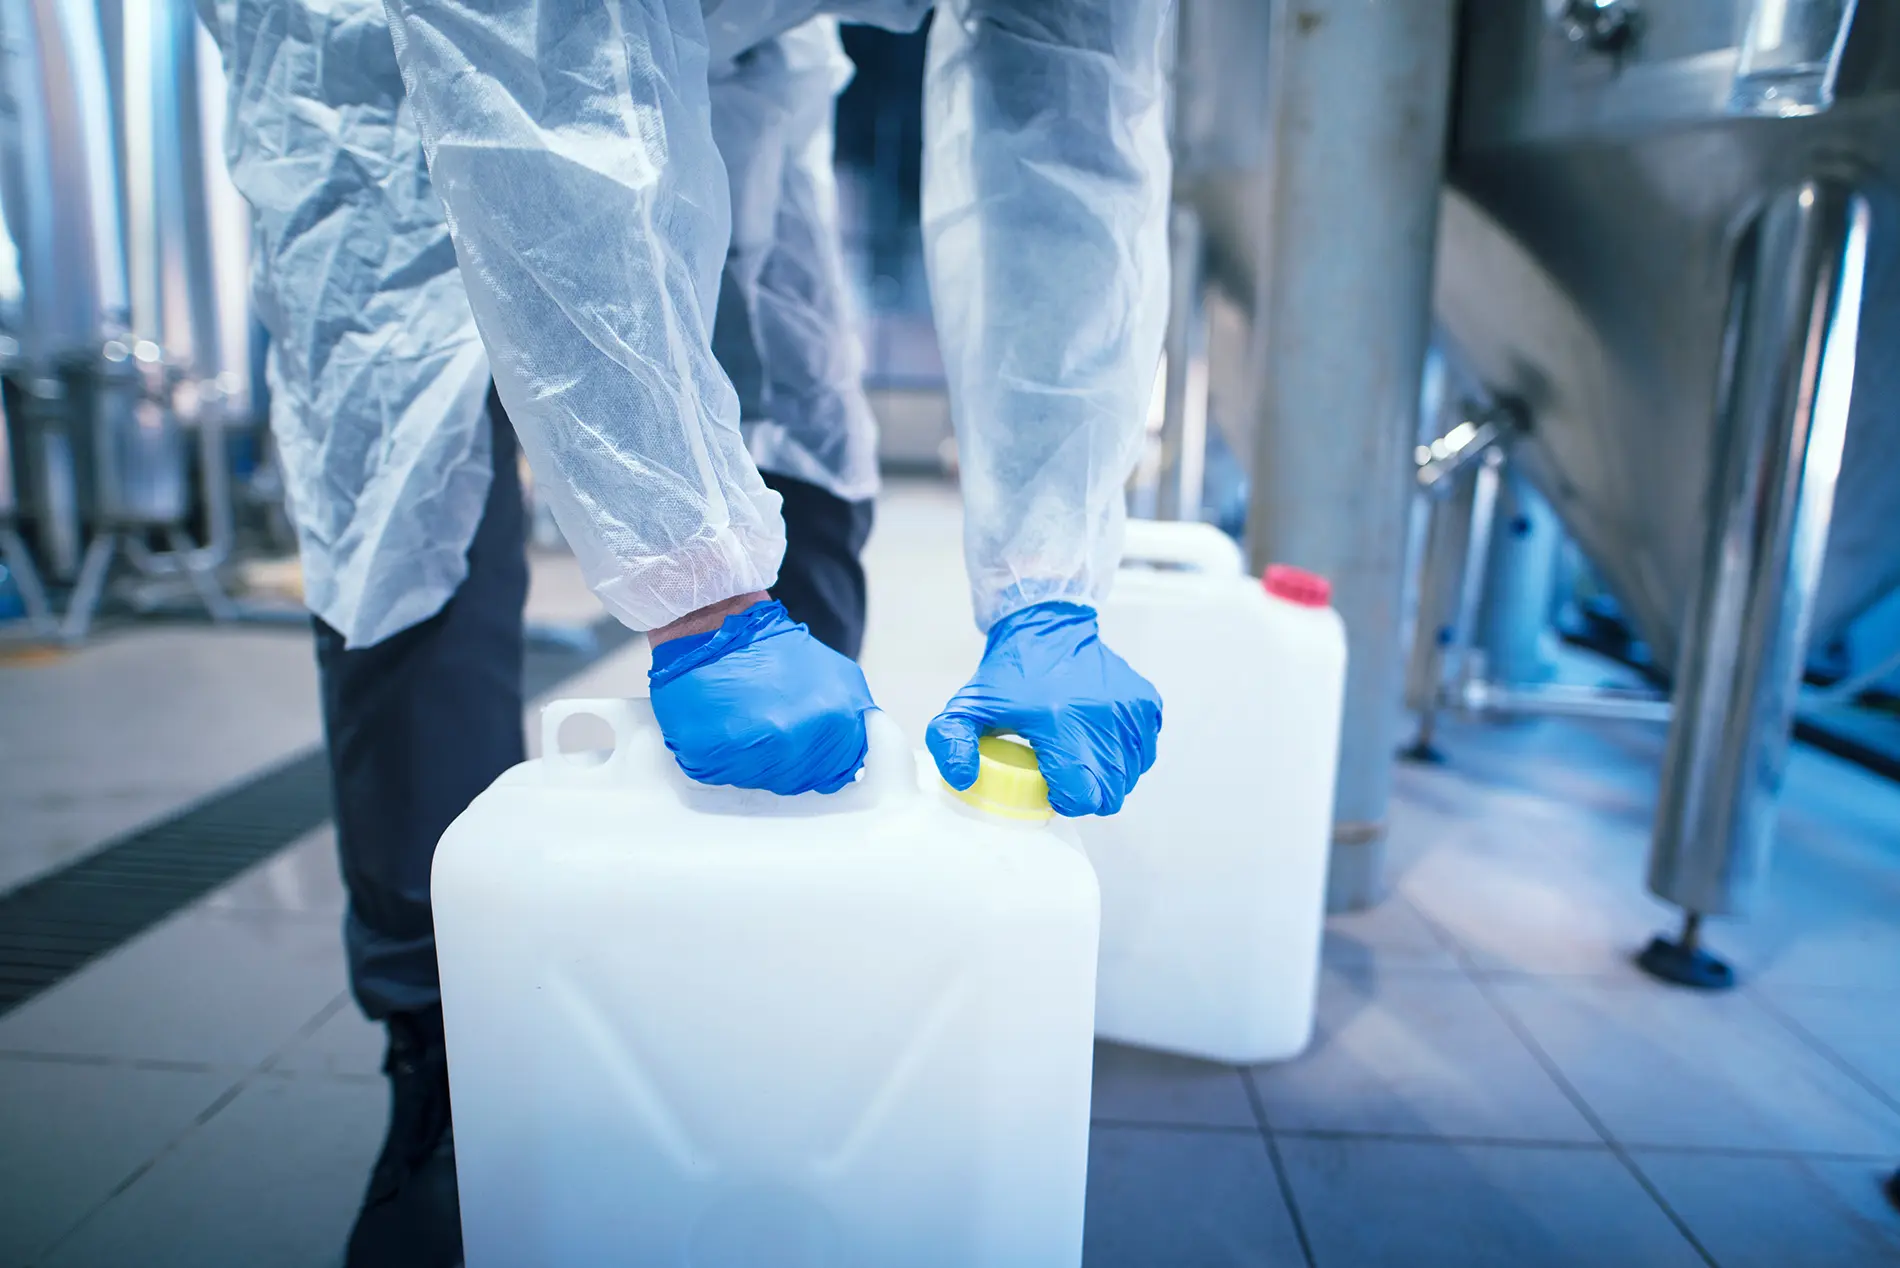 A worker in an industrial facility, following Apex’s process safety management program, wearing protective gloves while handling containers of highly hazardous chemicals.